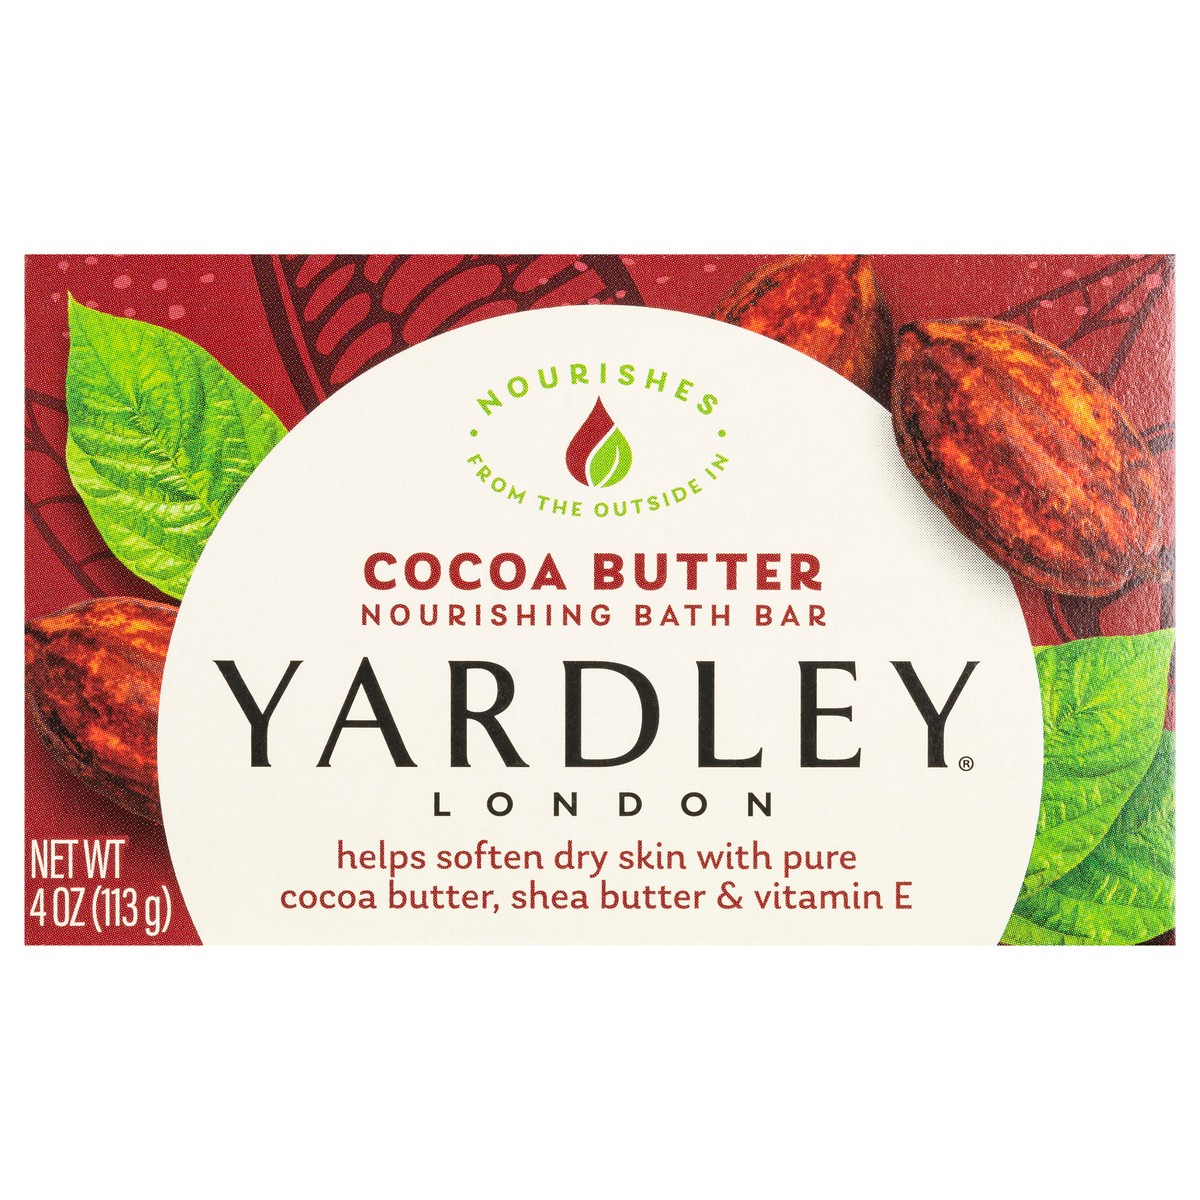 slide 1 of 11, Yardley London Nourishing Bath Soap Bar Cocoa Butter, Helps Soften Dry Skin with Pure Cocoa Butter, Shea Butter & Vitamin E, 4.0 oz Bath Bar, 1 Soap Bar, 4 oz